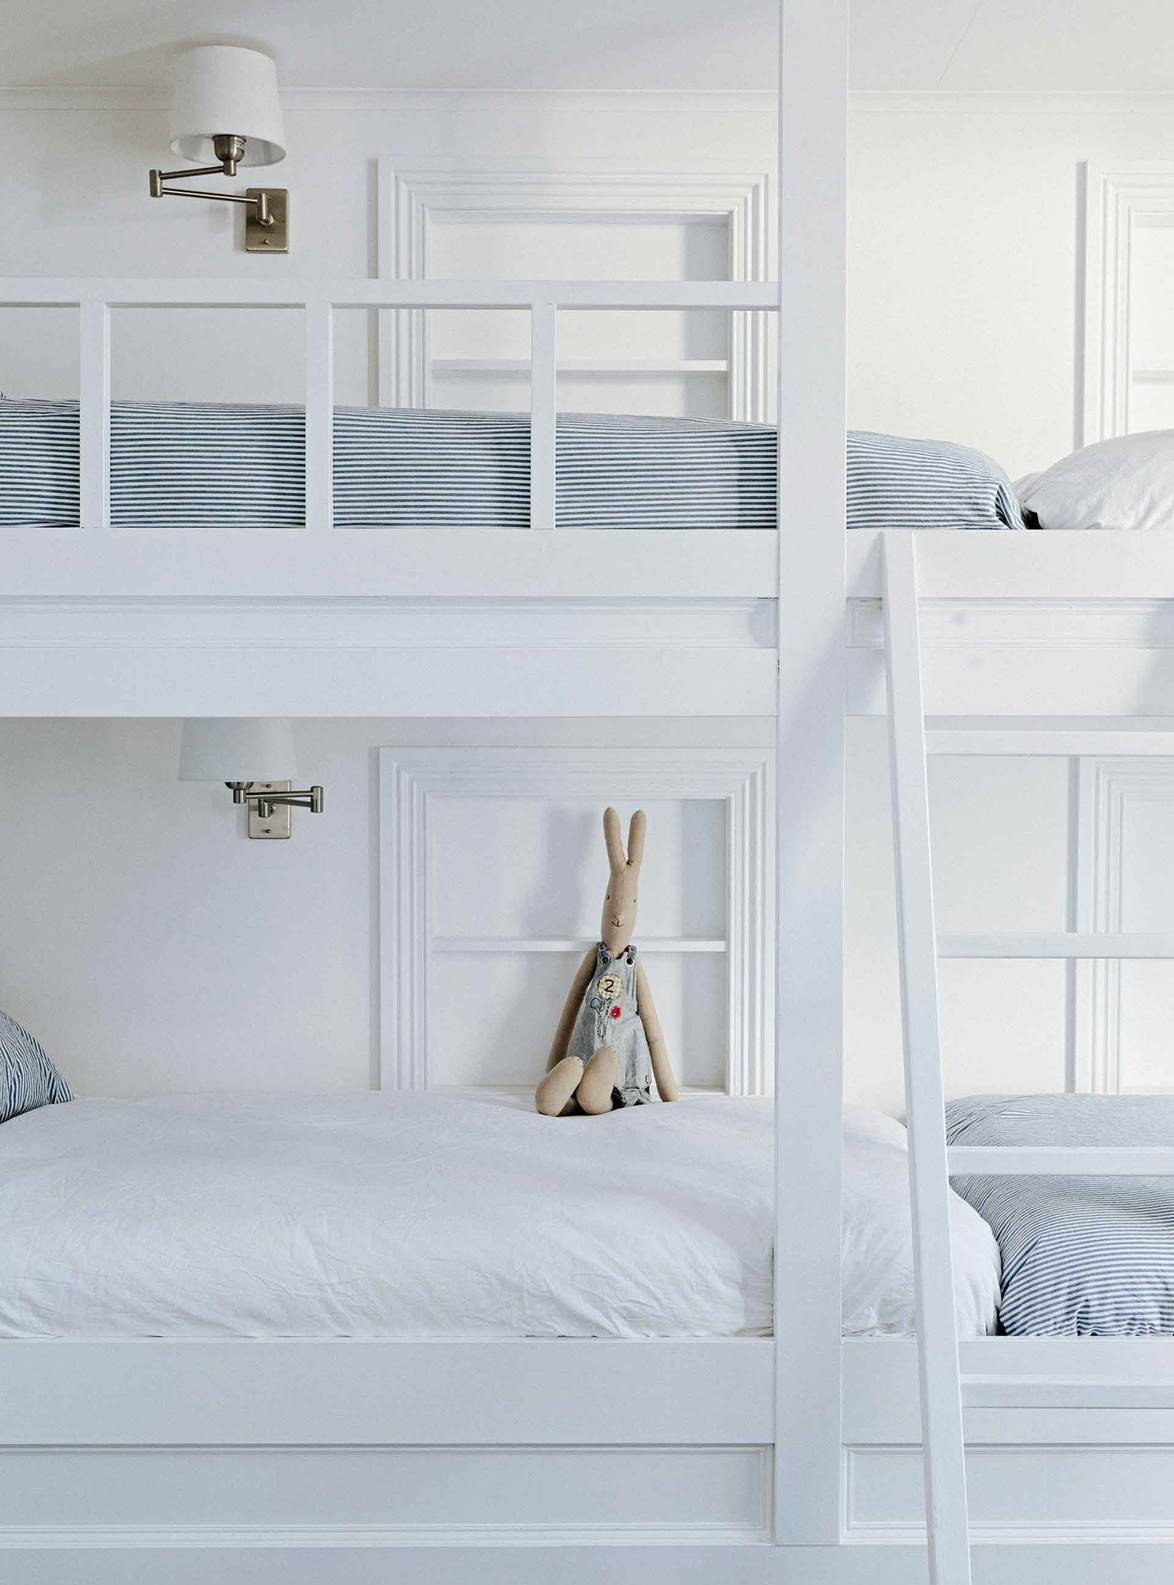 Bunk beds are great space savers, and a crisp, all-white color scheme will make a small room feel spacious and calming. Here, linen in the blue-ticking fabric adds subdued color, while extendable wall lamps add another layer of functionality.